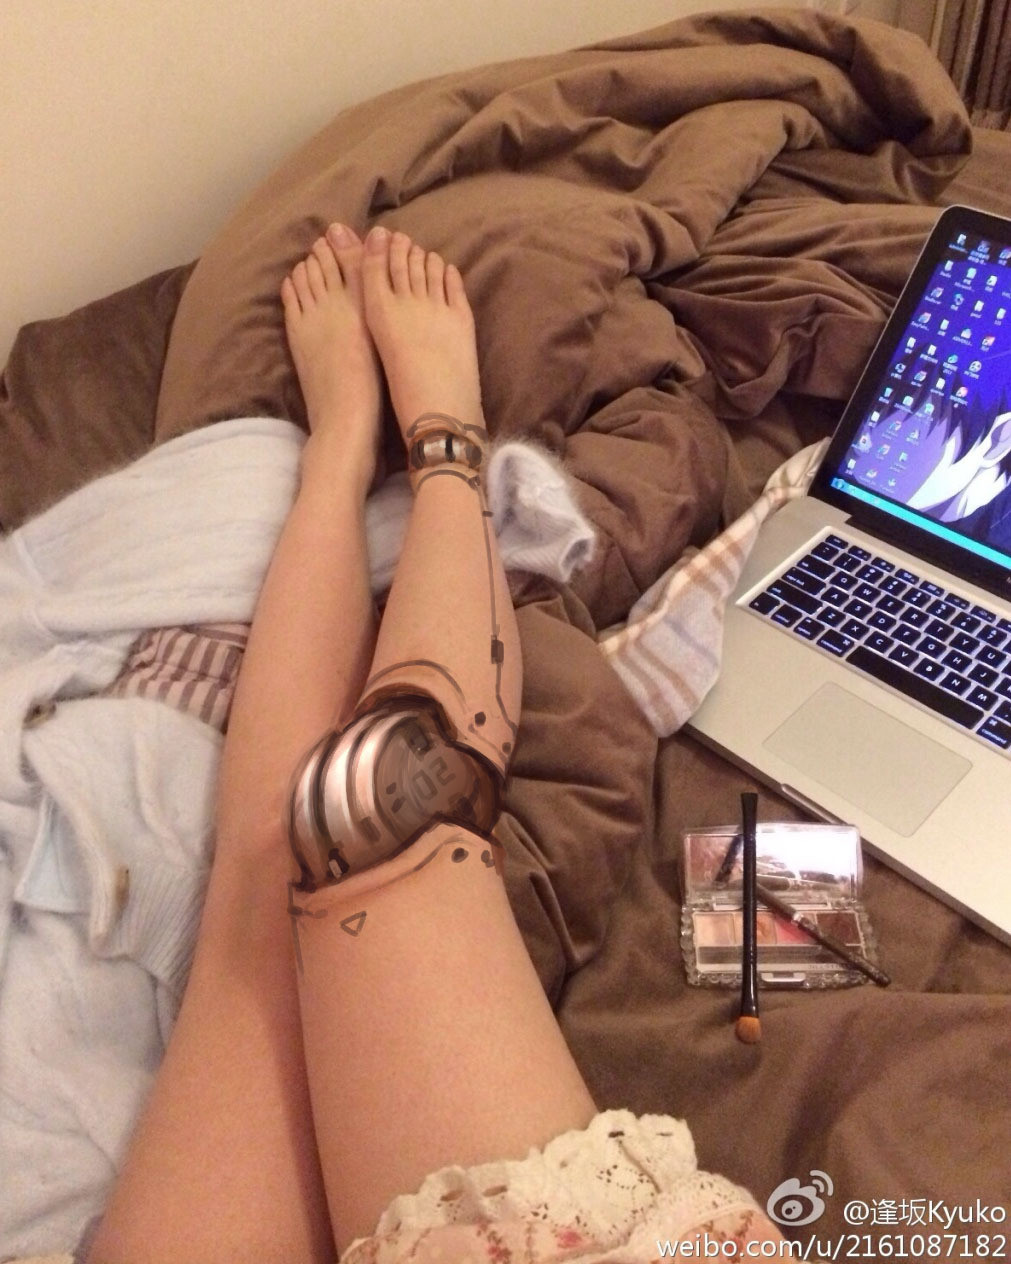 Awesome Cyborg Leg Make Up Job From Pic